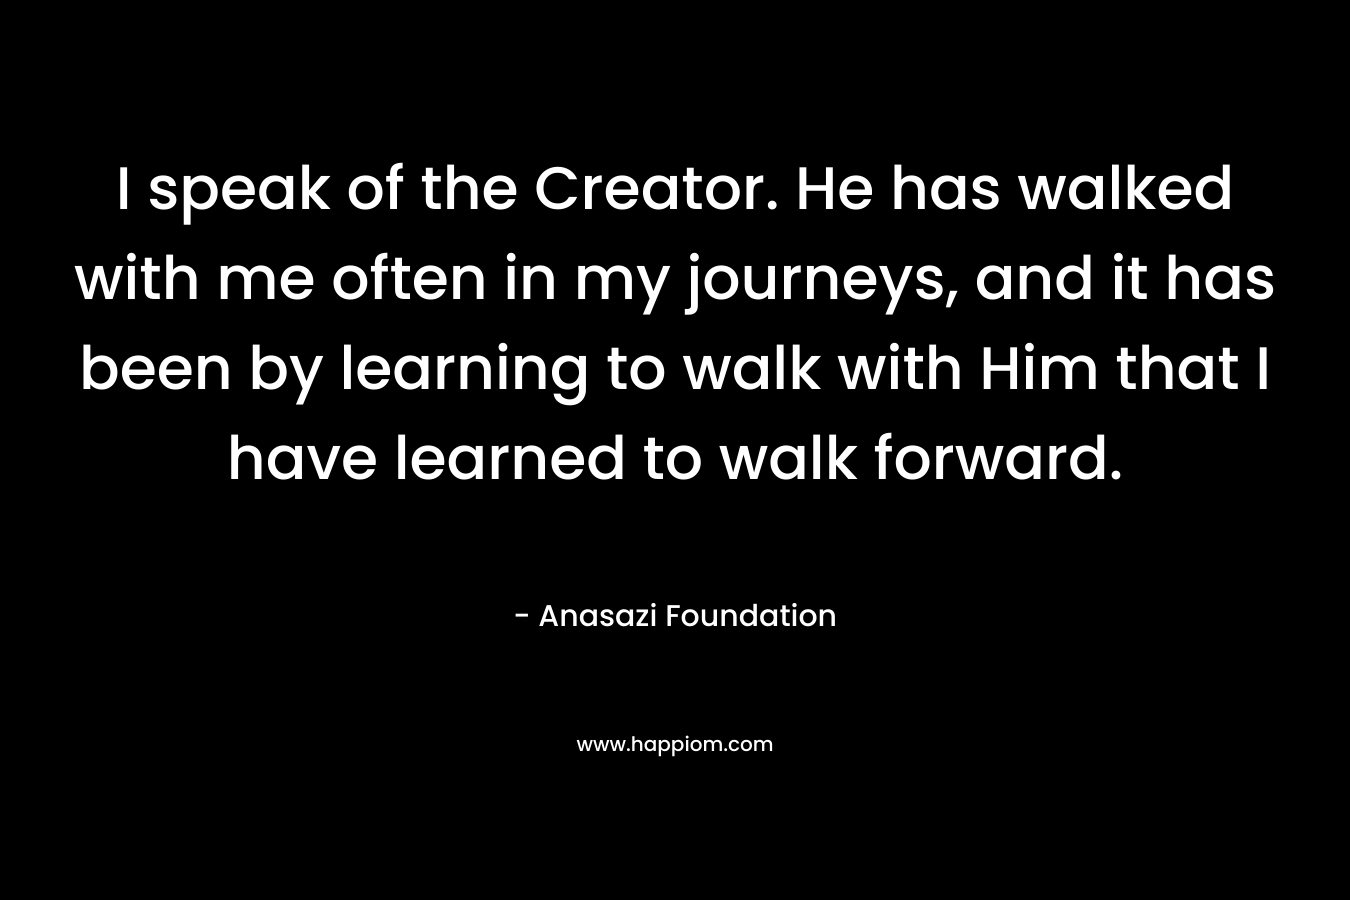 I speak of the Creator. He has walked with me often in my journeys, and it has been by learning to walk with Him that I have learned to walk forward.